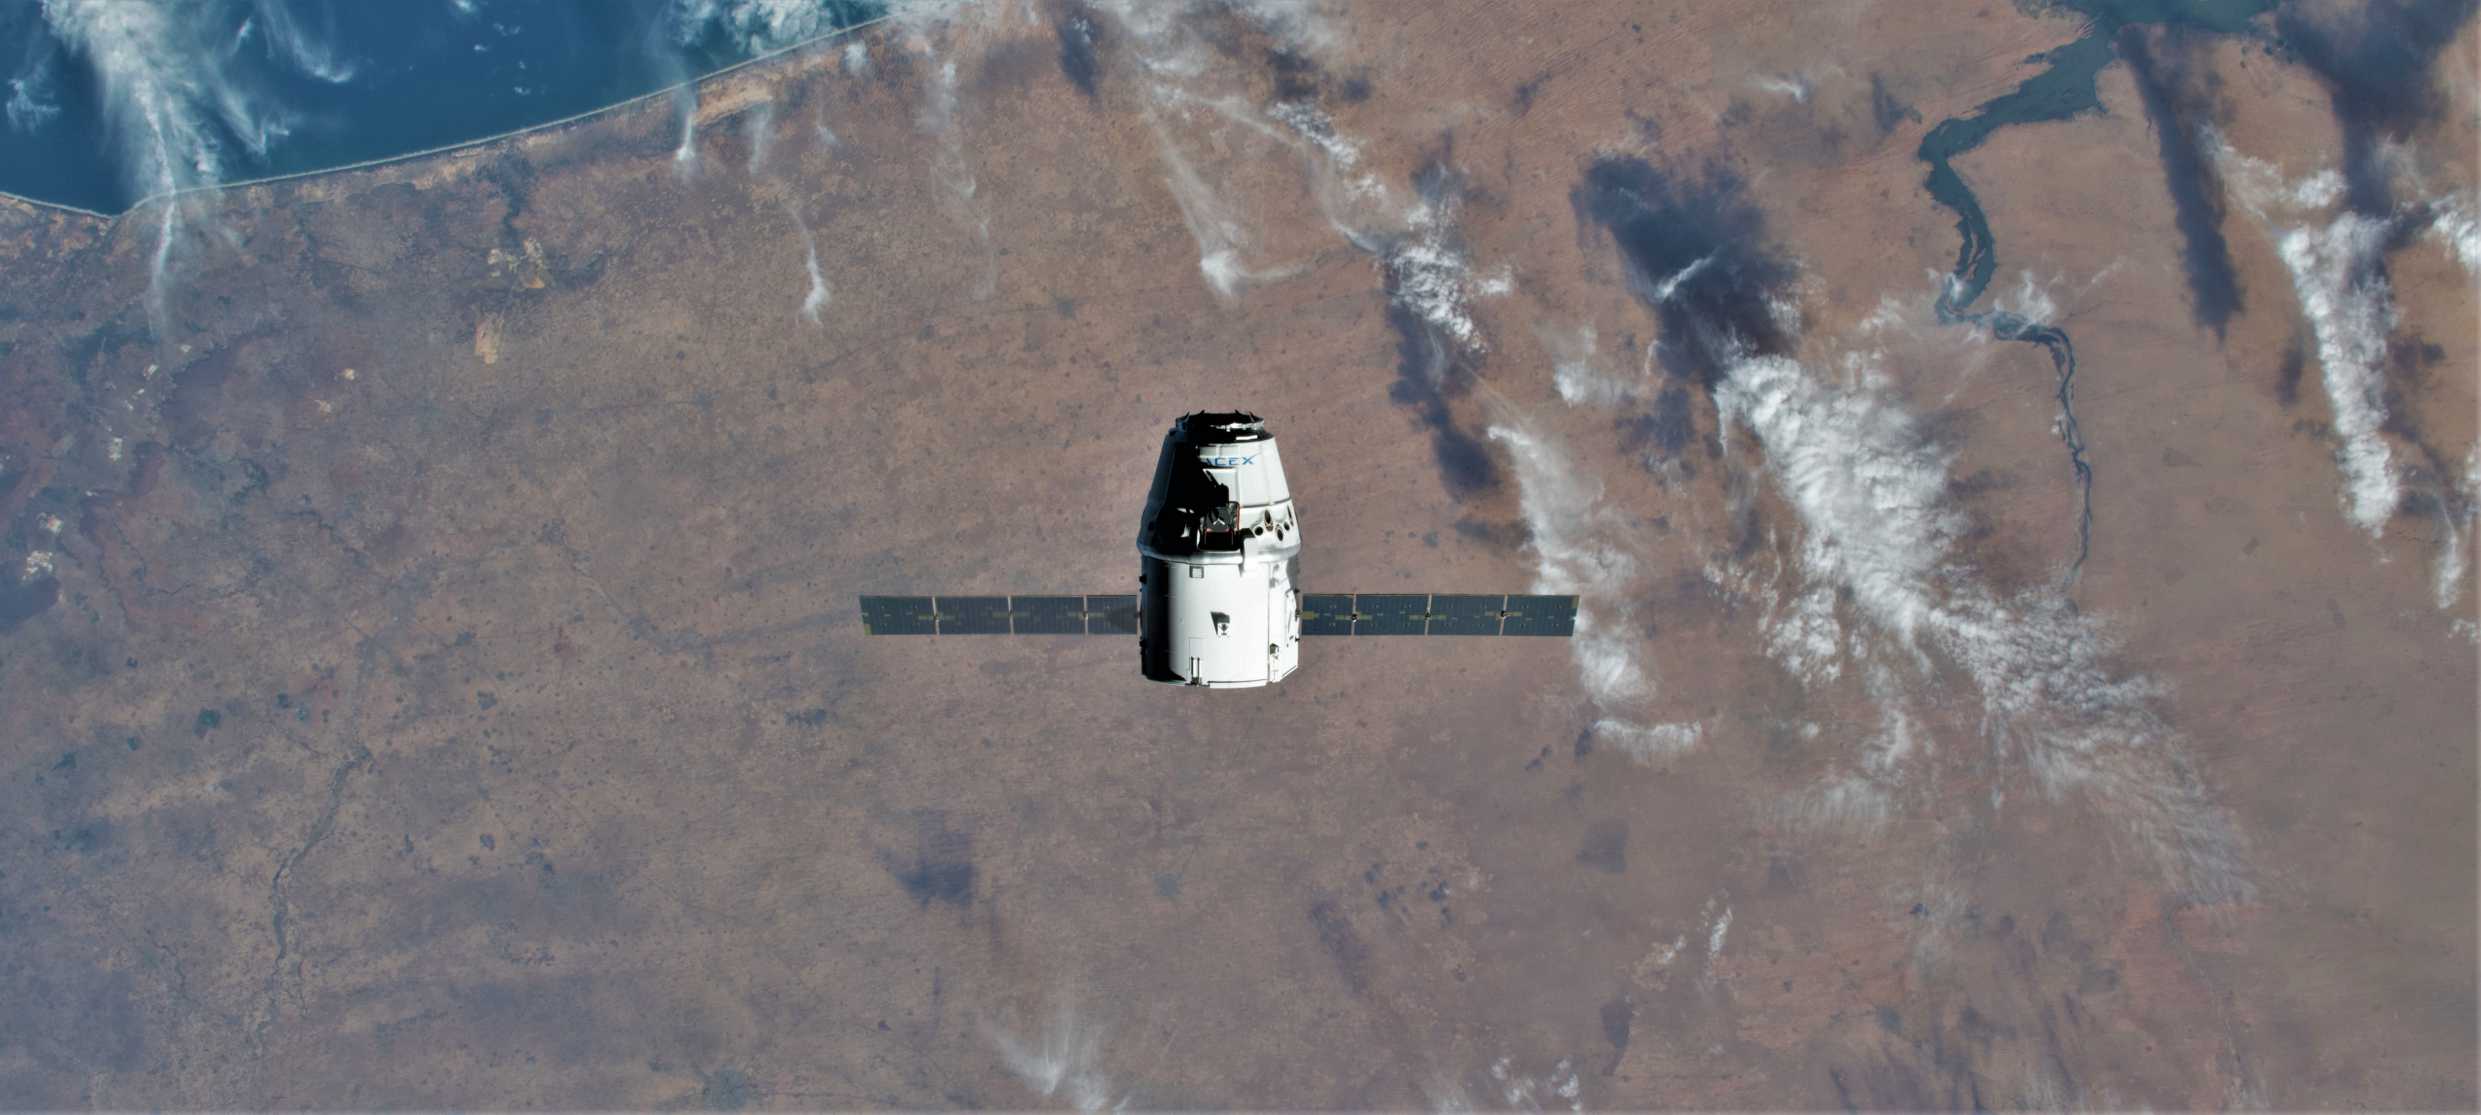 CRS-20 Cargo Dragon C112 ISS arrival 030920 (NASA) 1 crop (c)